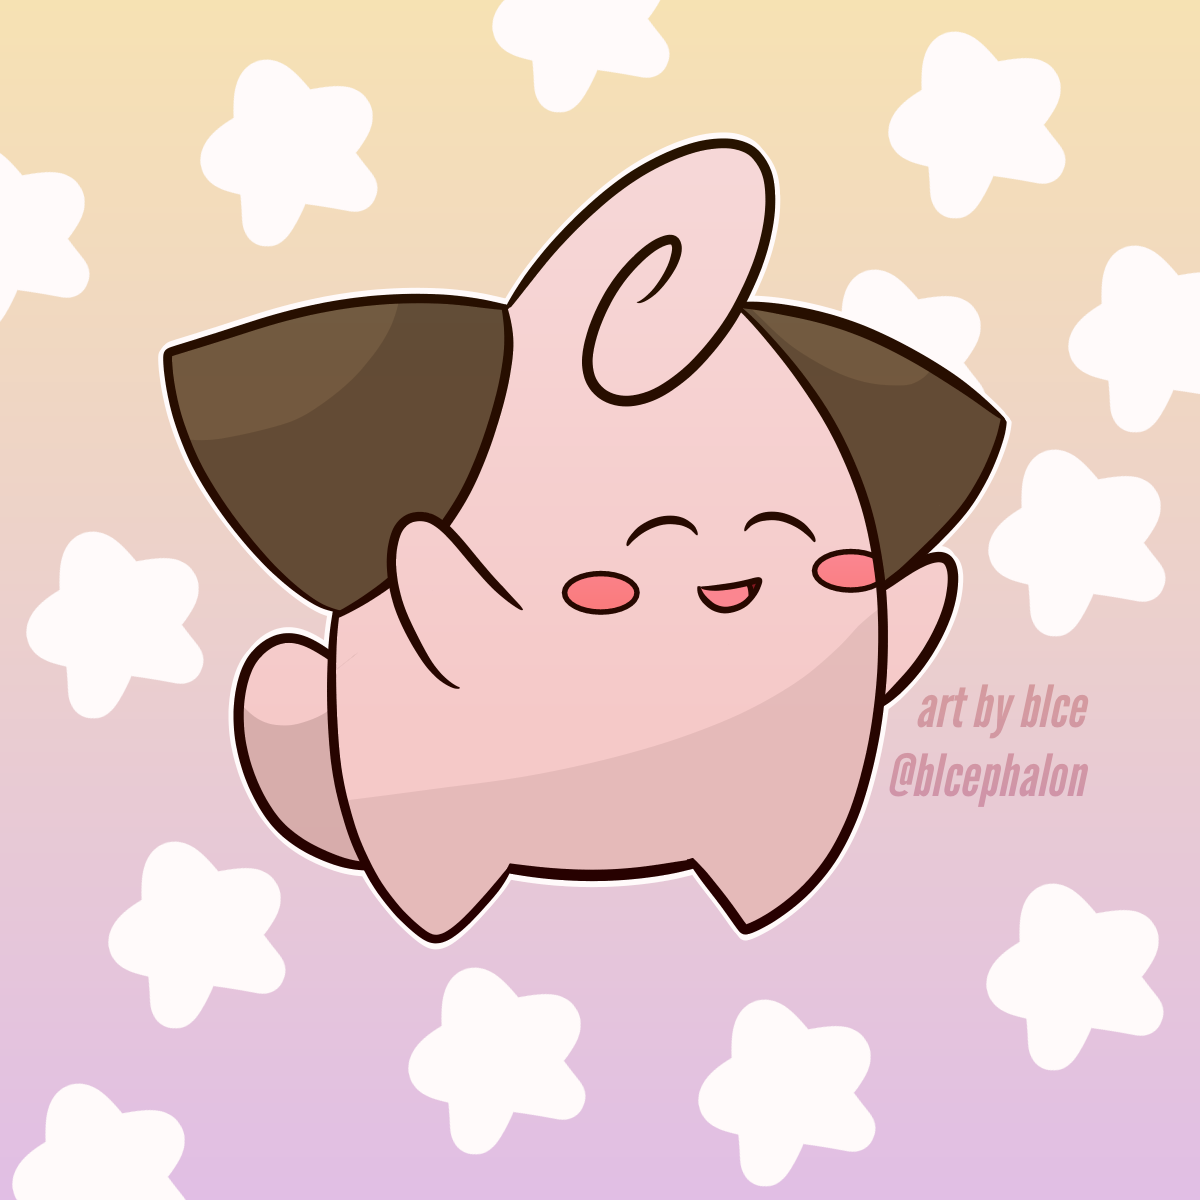 clefbday.png